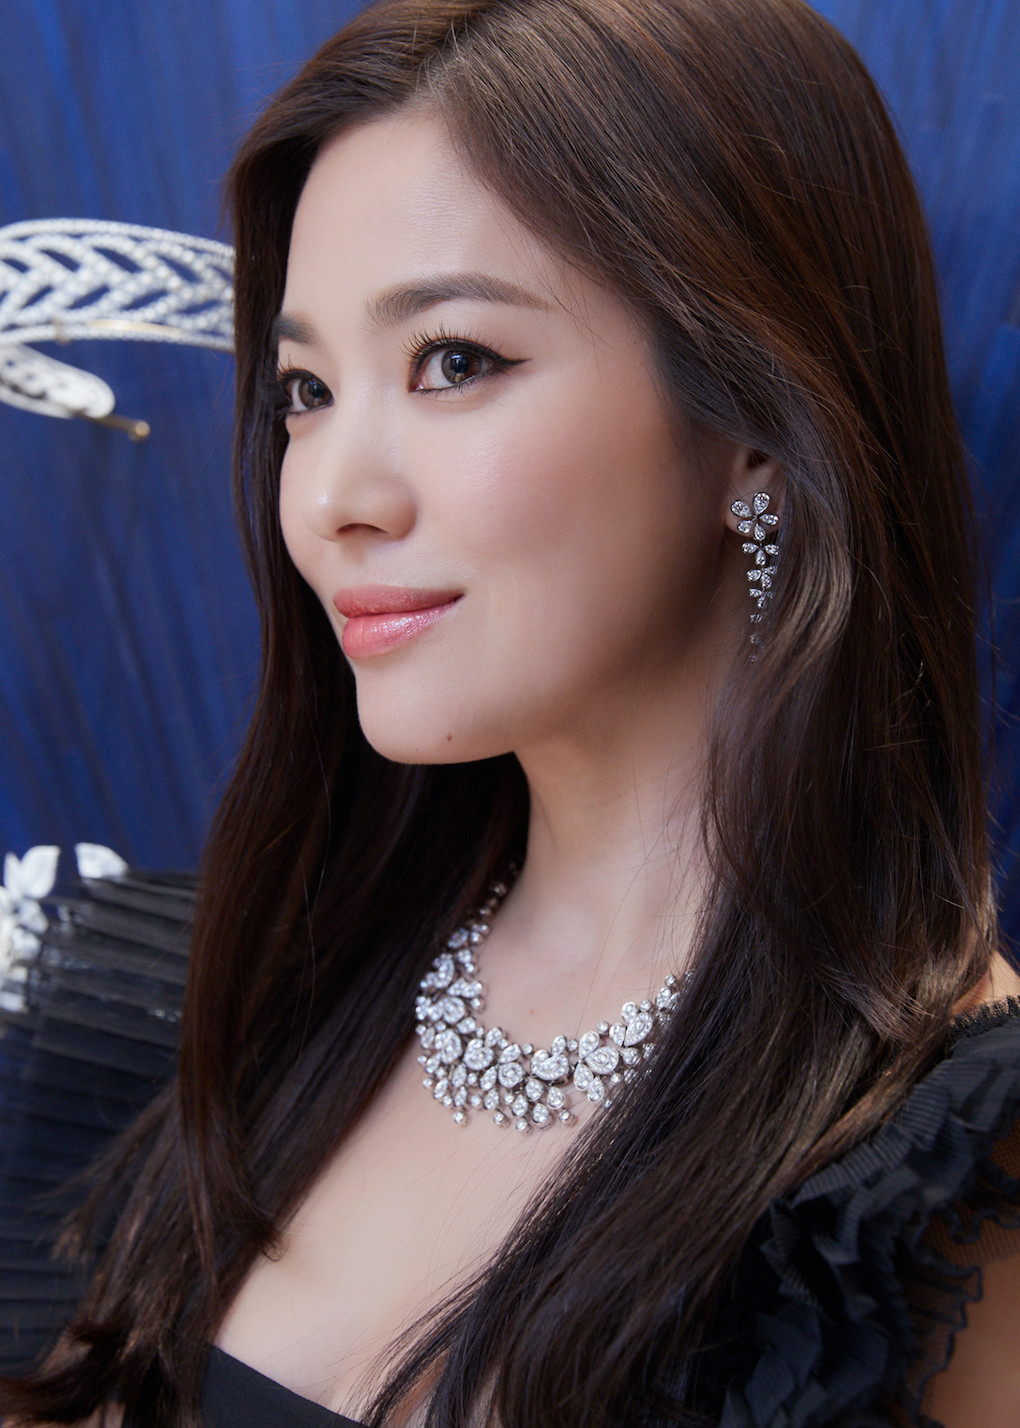 Song Hye-Kyo Privately Graces Chaumet Boutique Reopening In Seoul | E! News